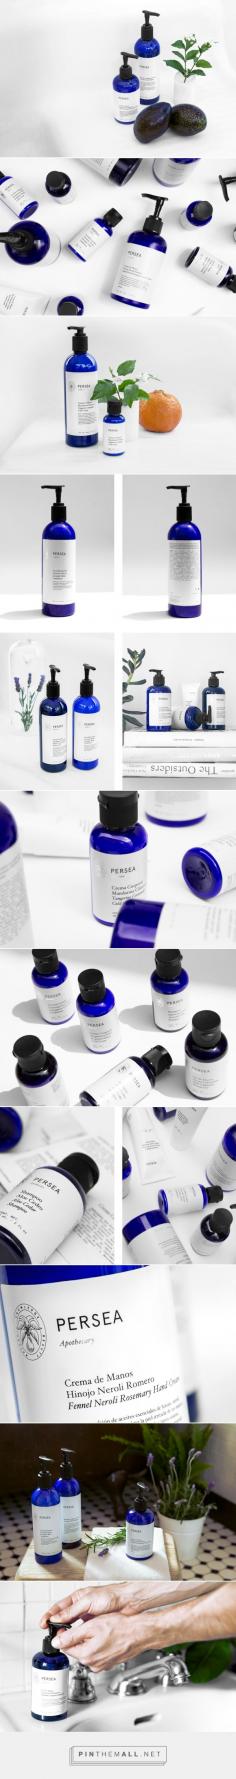 
                    
                        PERSEA APOTHECARY / Persea is a professional beauty and skincare products brand from Mexico, whose production is based purely on scientifically backed-up natural ingredients.
                    
                